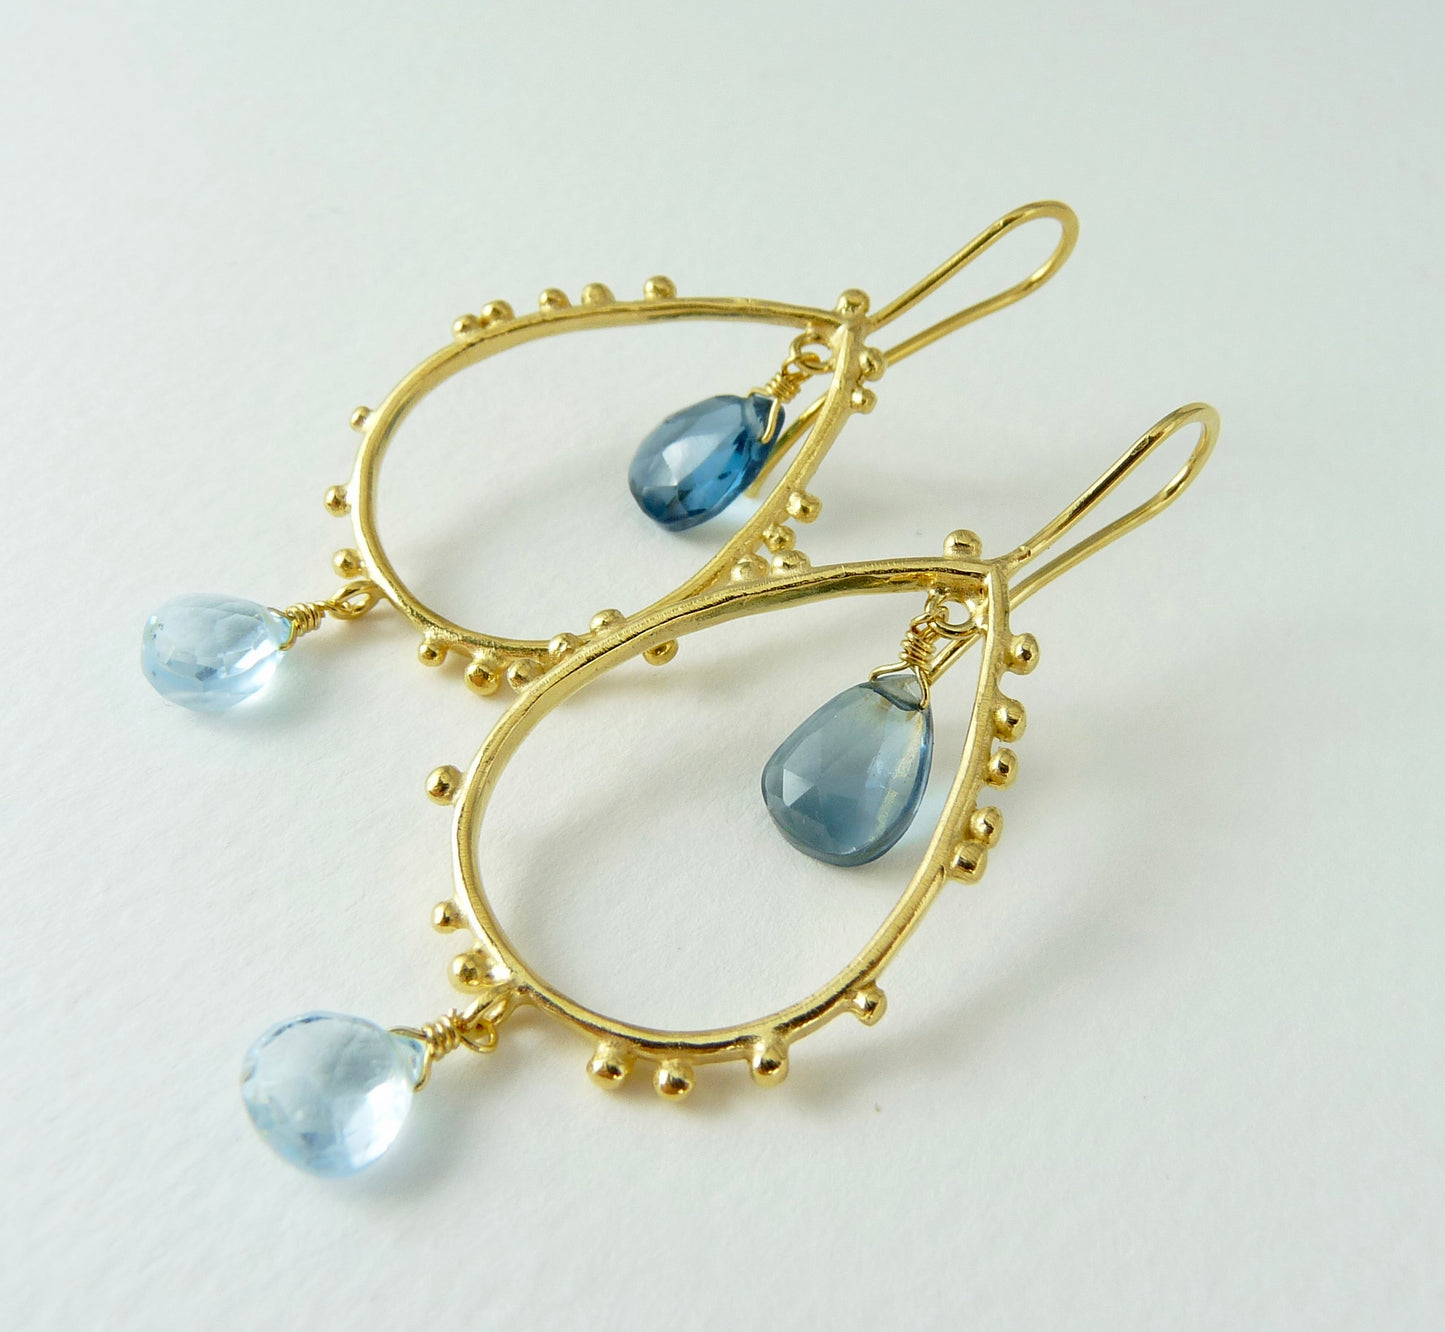 Gorgeous Granulation Drop Earrings with Topaz